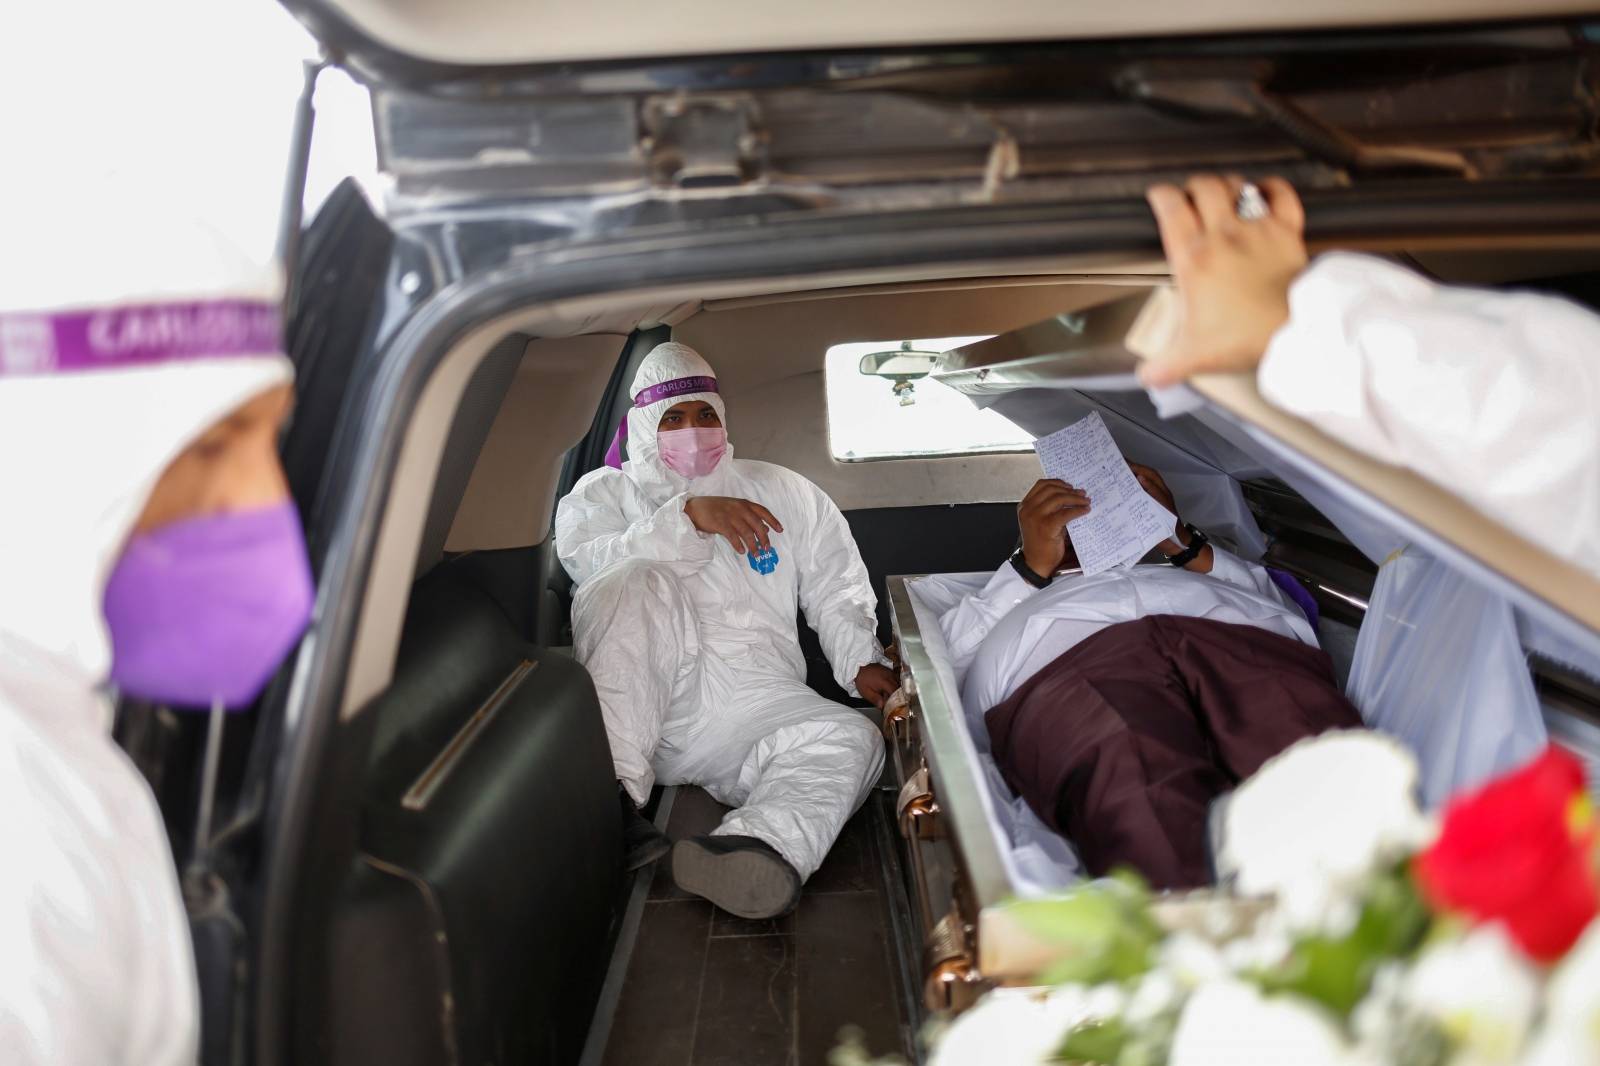 Carlos Mayorga, Mexican candidate for federal representative, lies in a coffin as part of his campaign slogan "If I don't deliver, let them bury me alive" near the Zaragoza-Ysleta international border bridge between Mexico and the U.S., in Ciudad Juarez